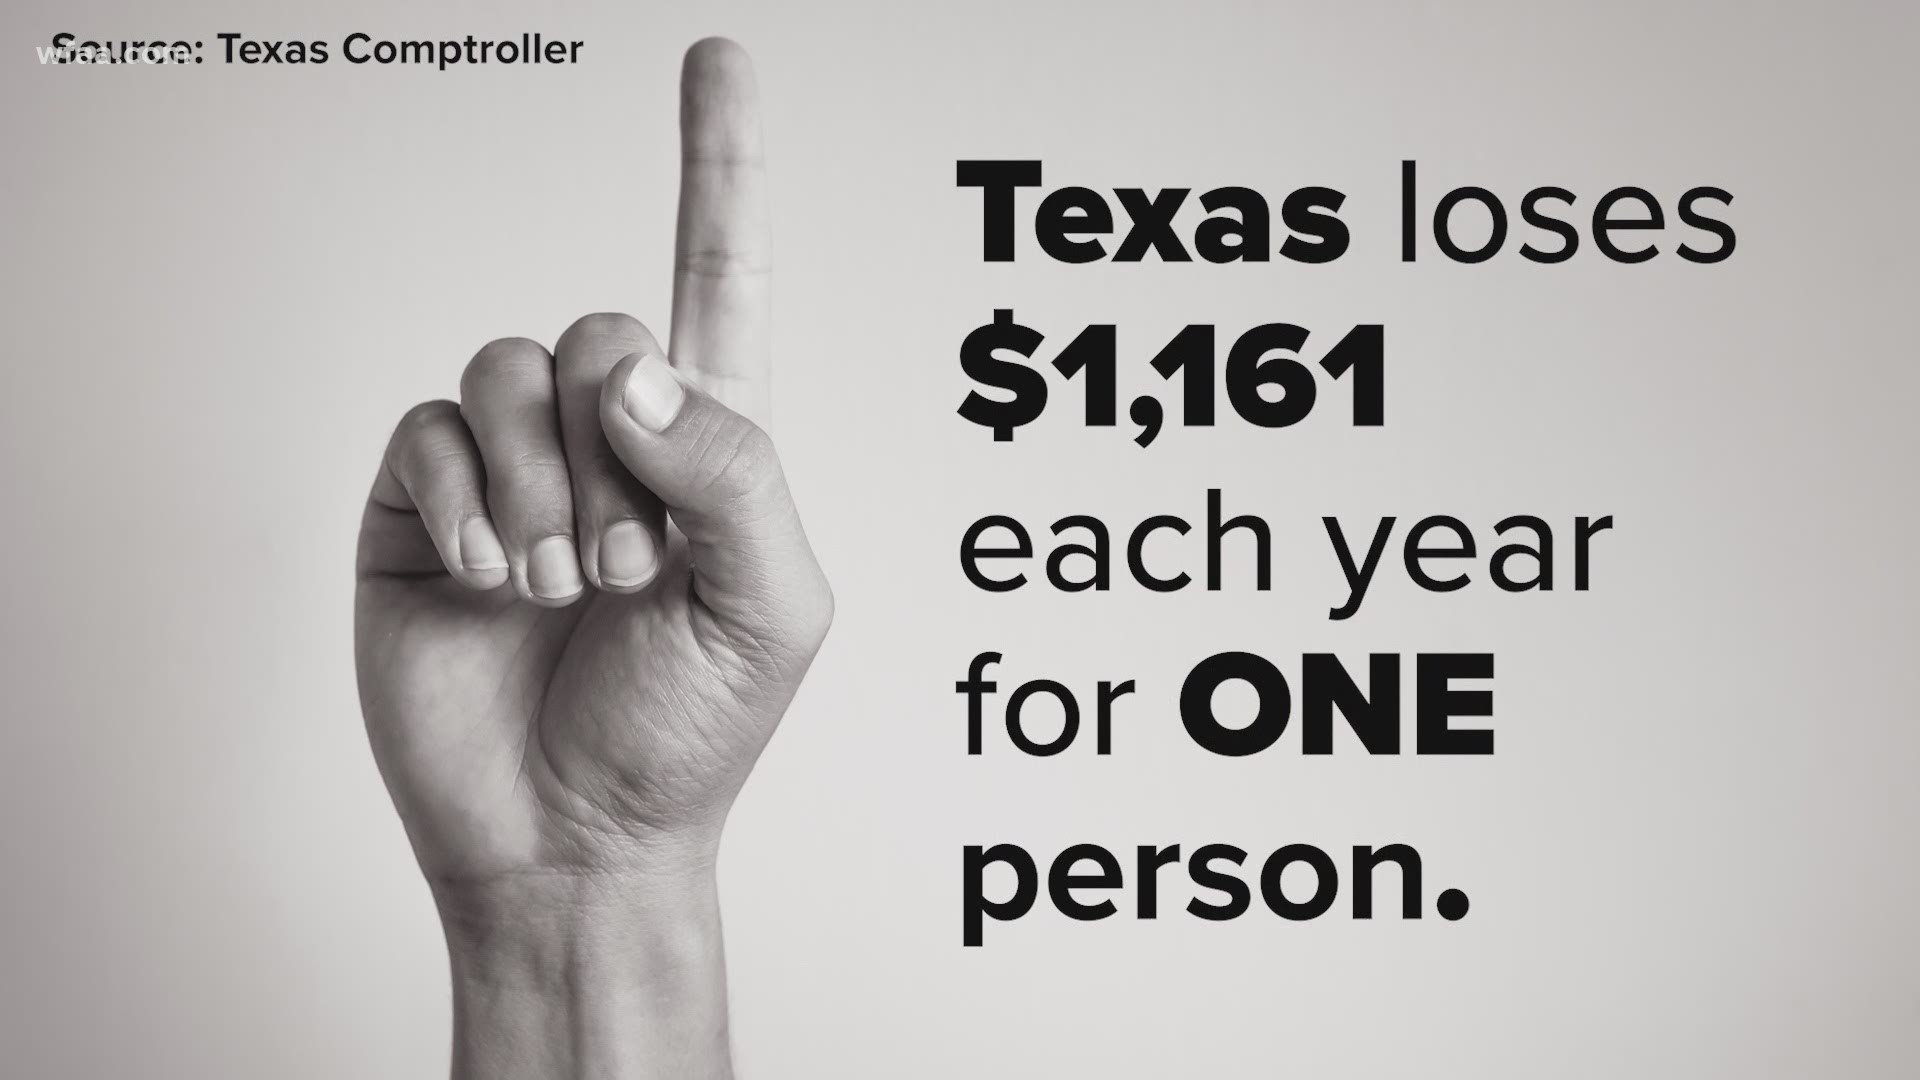 The more people who don't fill out the form, the more money Texas loses out on.